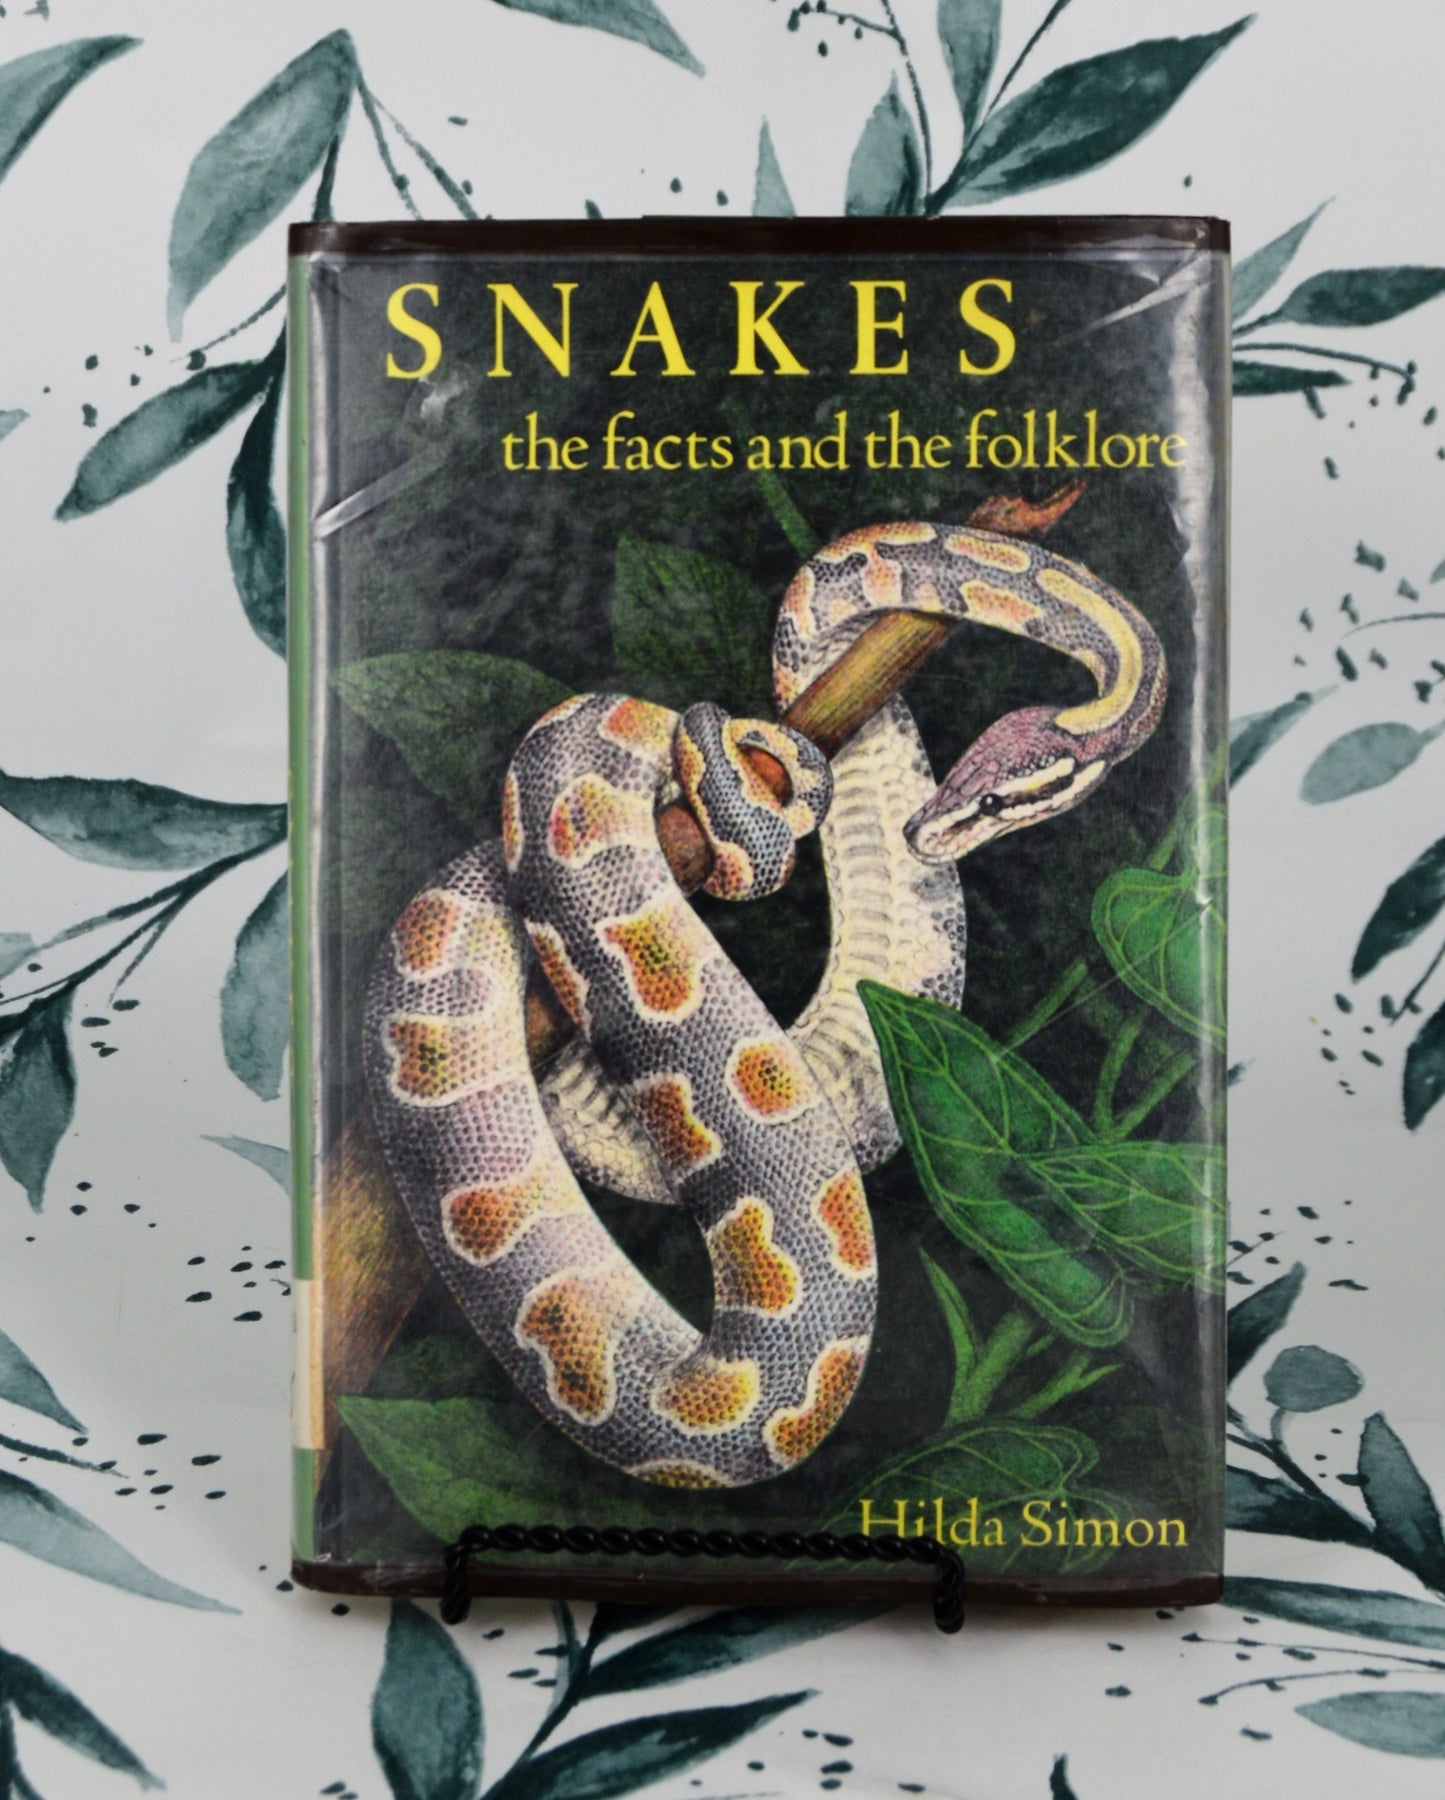 Snakes: the facts and the folklore